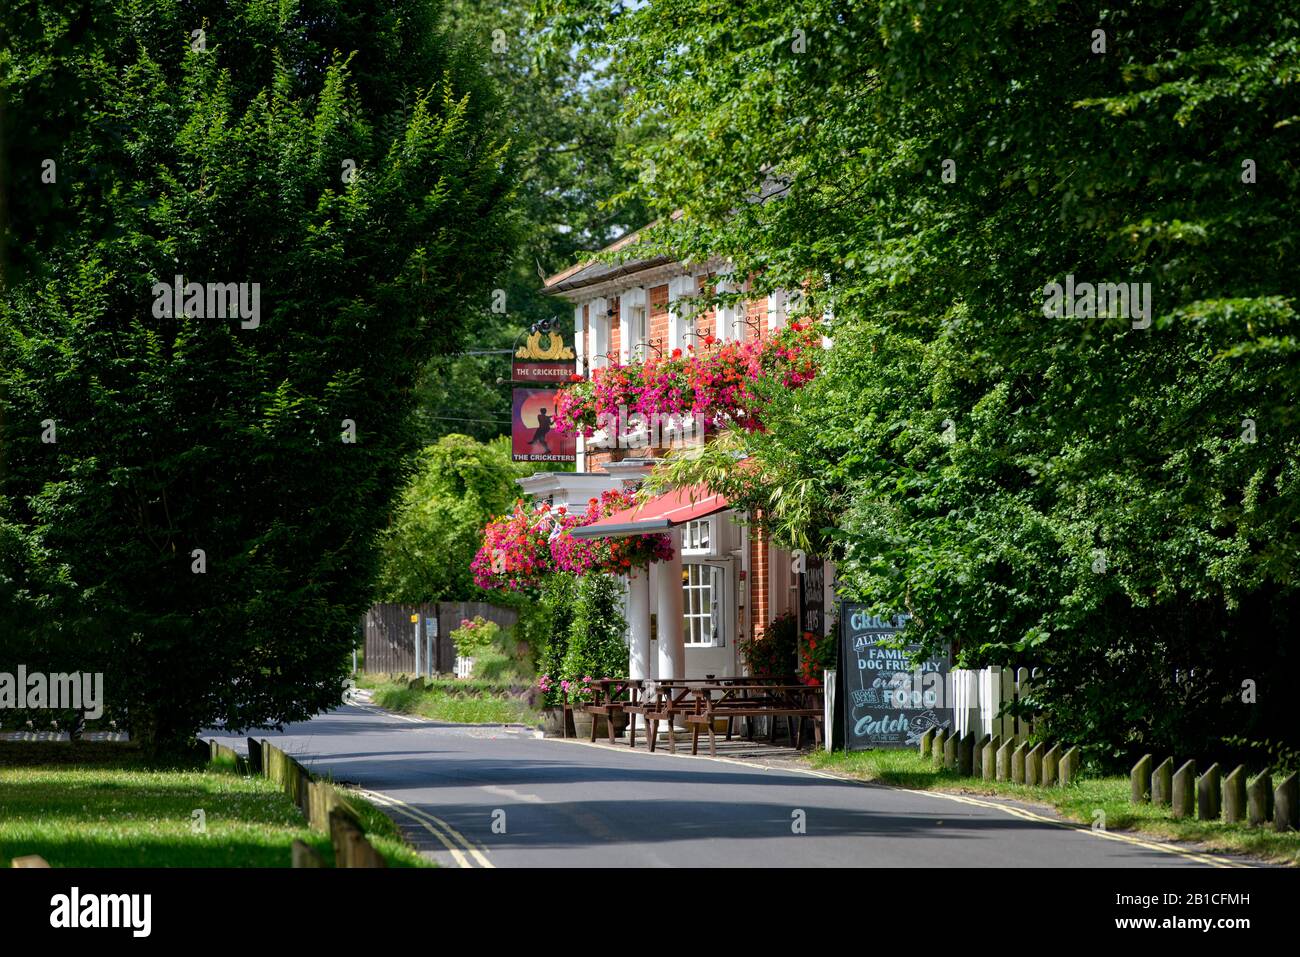 The Cricketers public House, Hartley Wintney Stock Photo